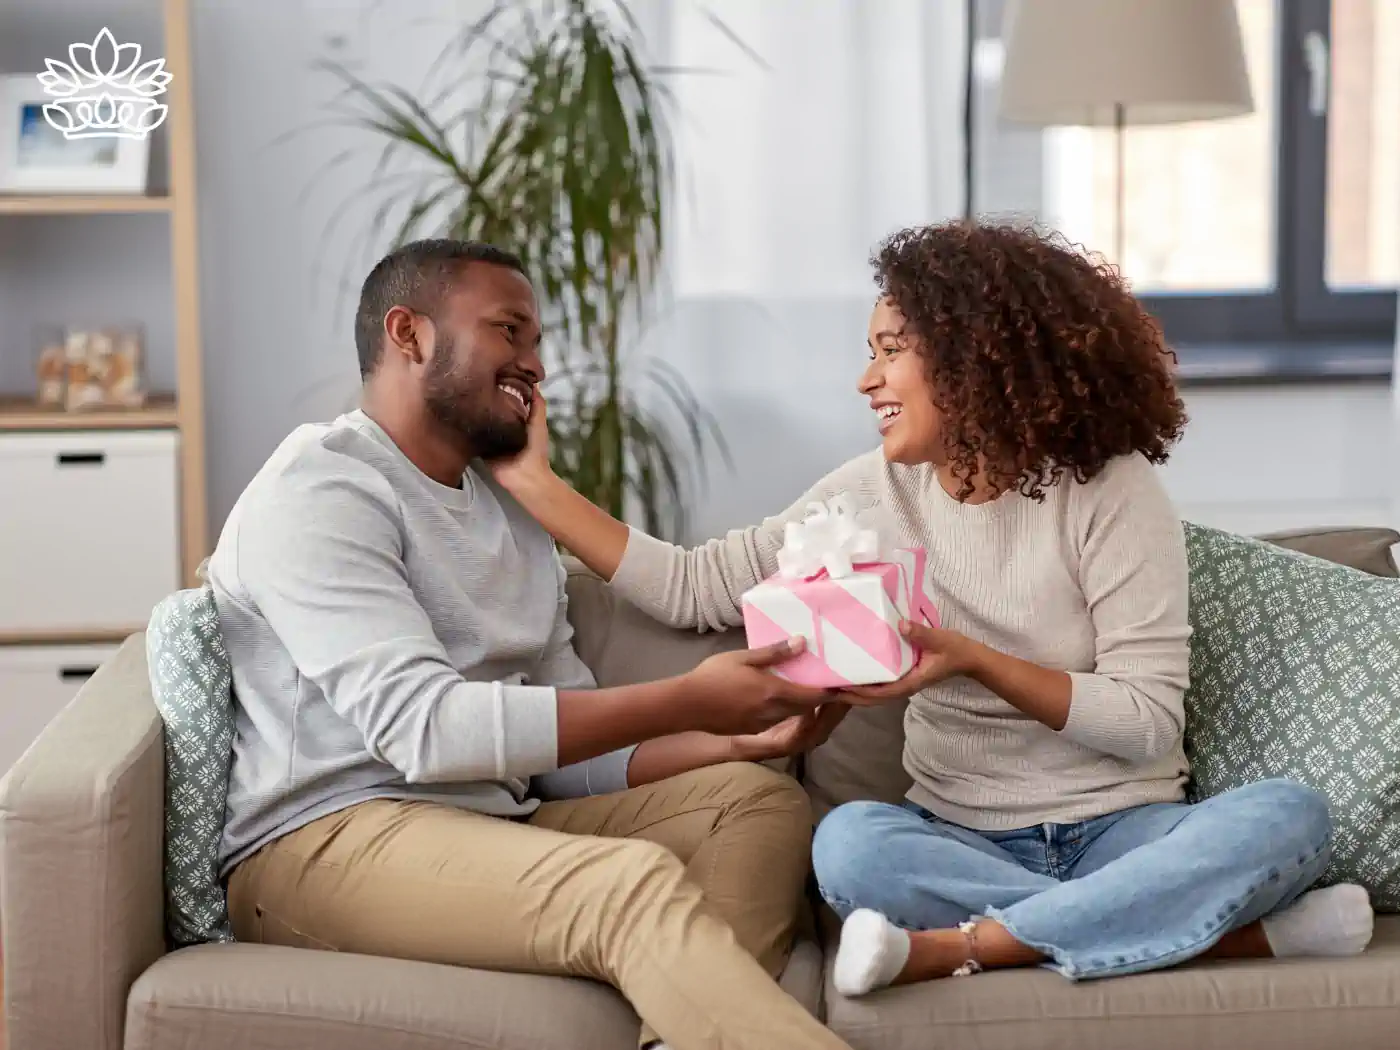 Joyful woman presenting a pink Valentine's Day gift box to a smiling man on a sofa in a modern living room. Fabulous Flowers and Gifts